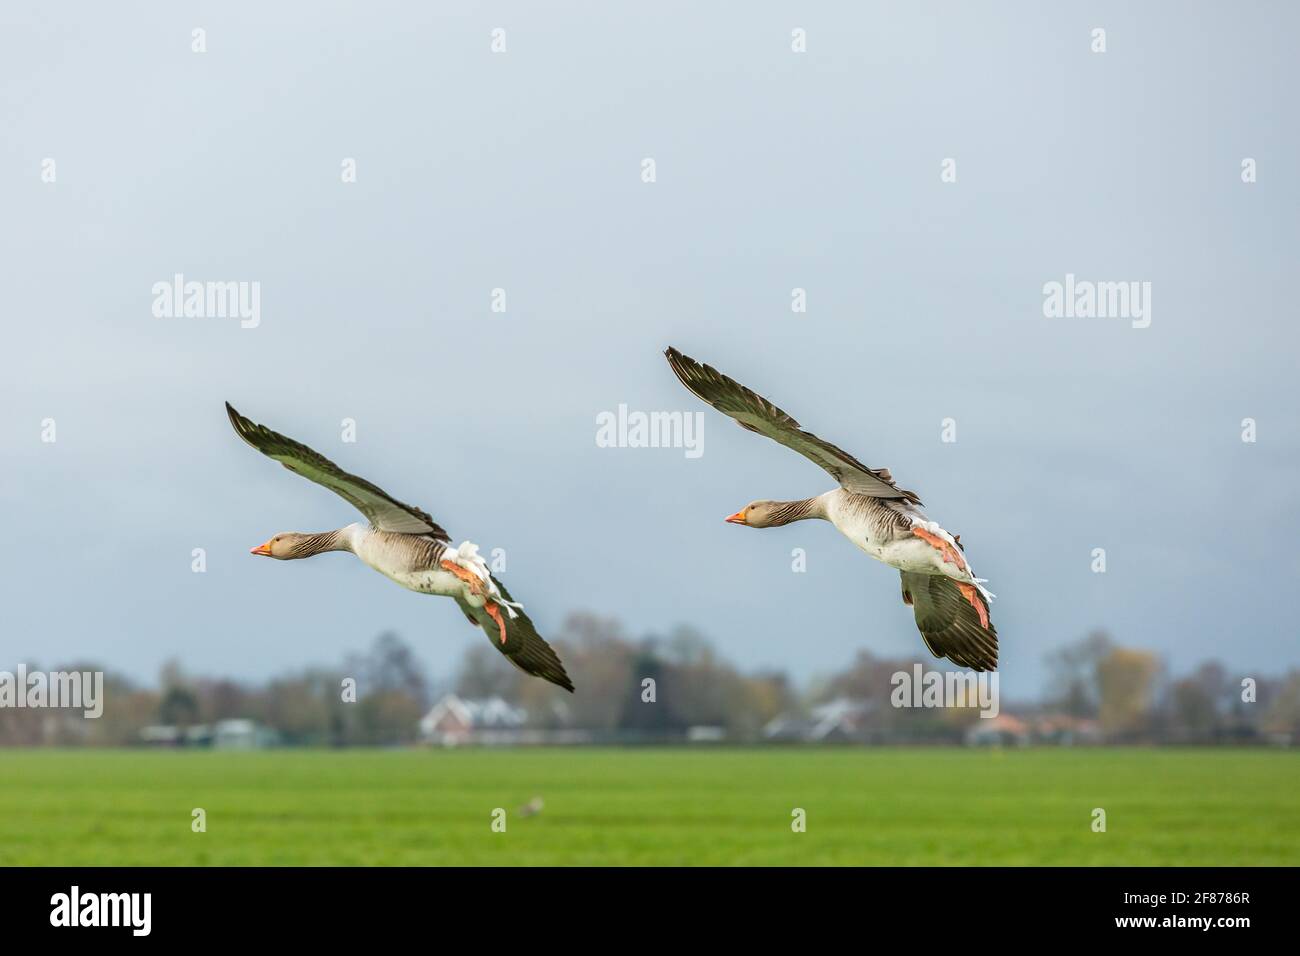 Close up of two isolated flying Greylag Geese, Anser anser, in gliding flight with beautiful bright orange beak and legs against blurred background wi Stock Photo